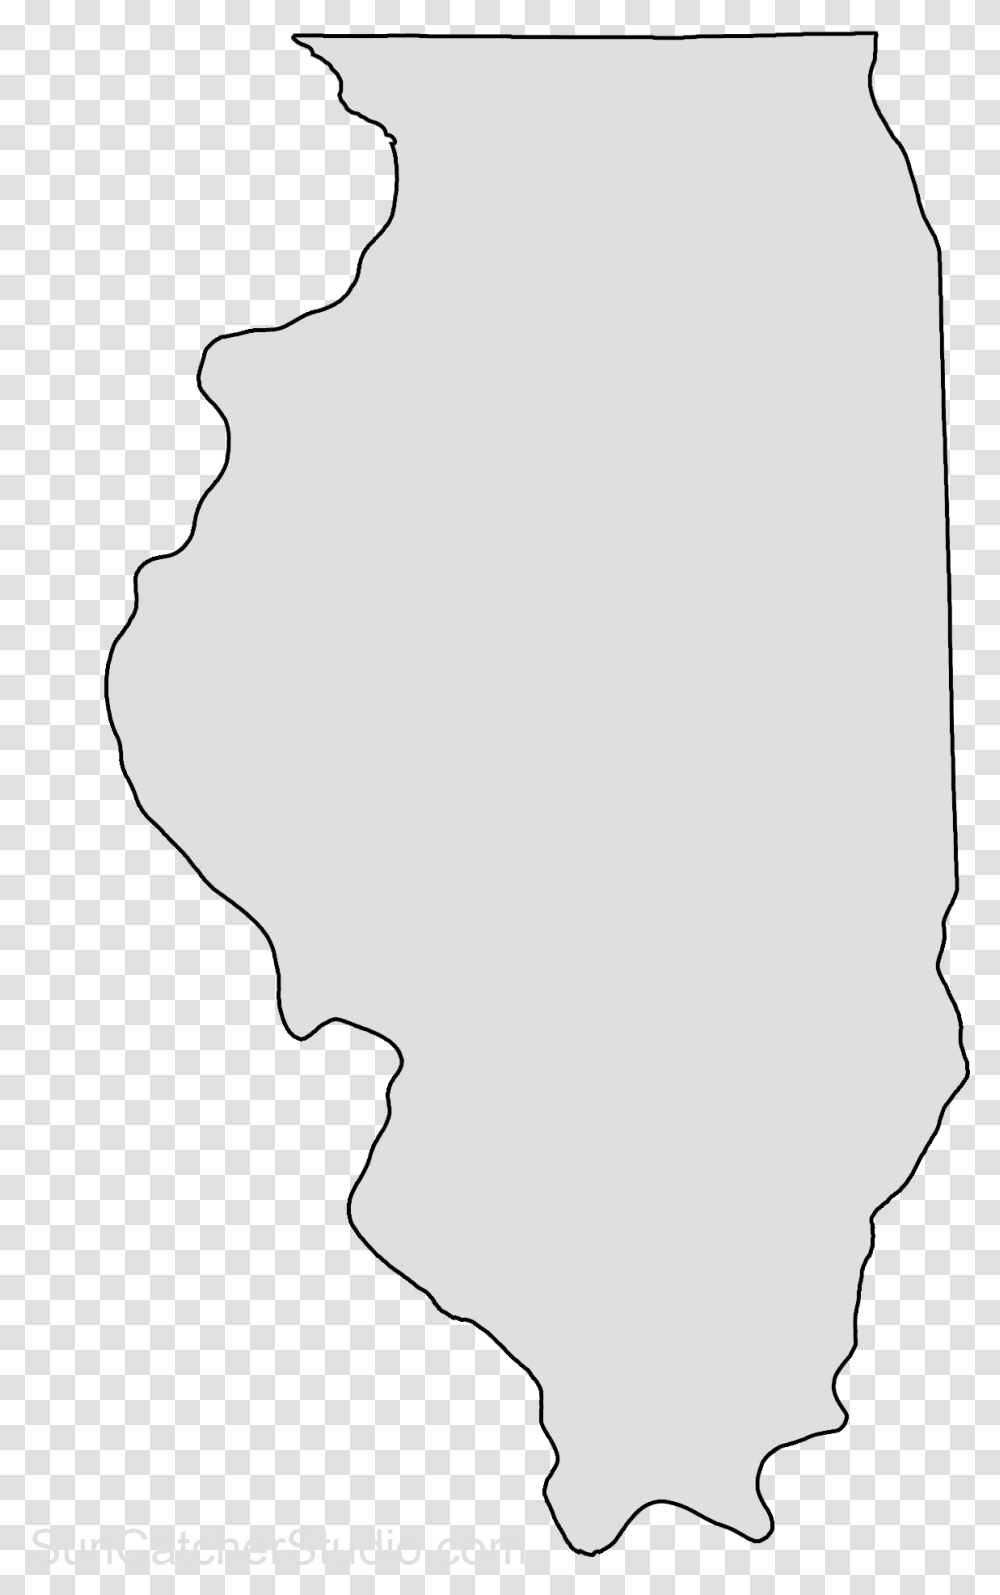 Illinois State Outline, Silhouette, Person, Human, Face Transparent Png